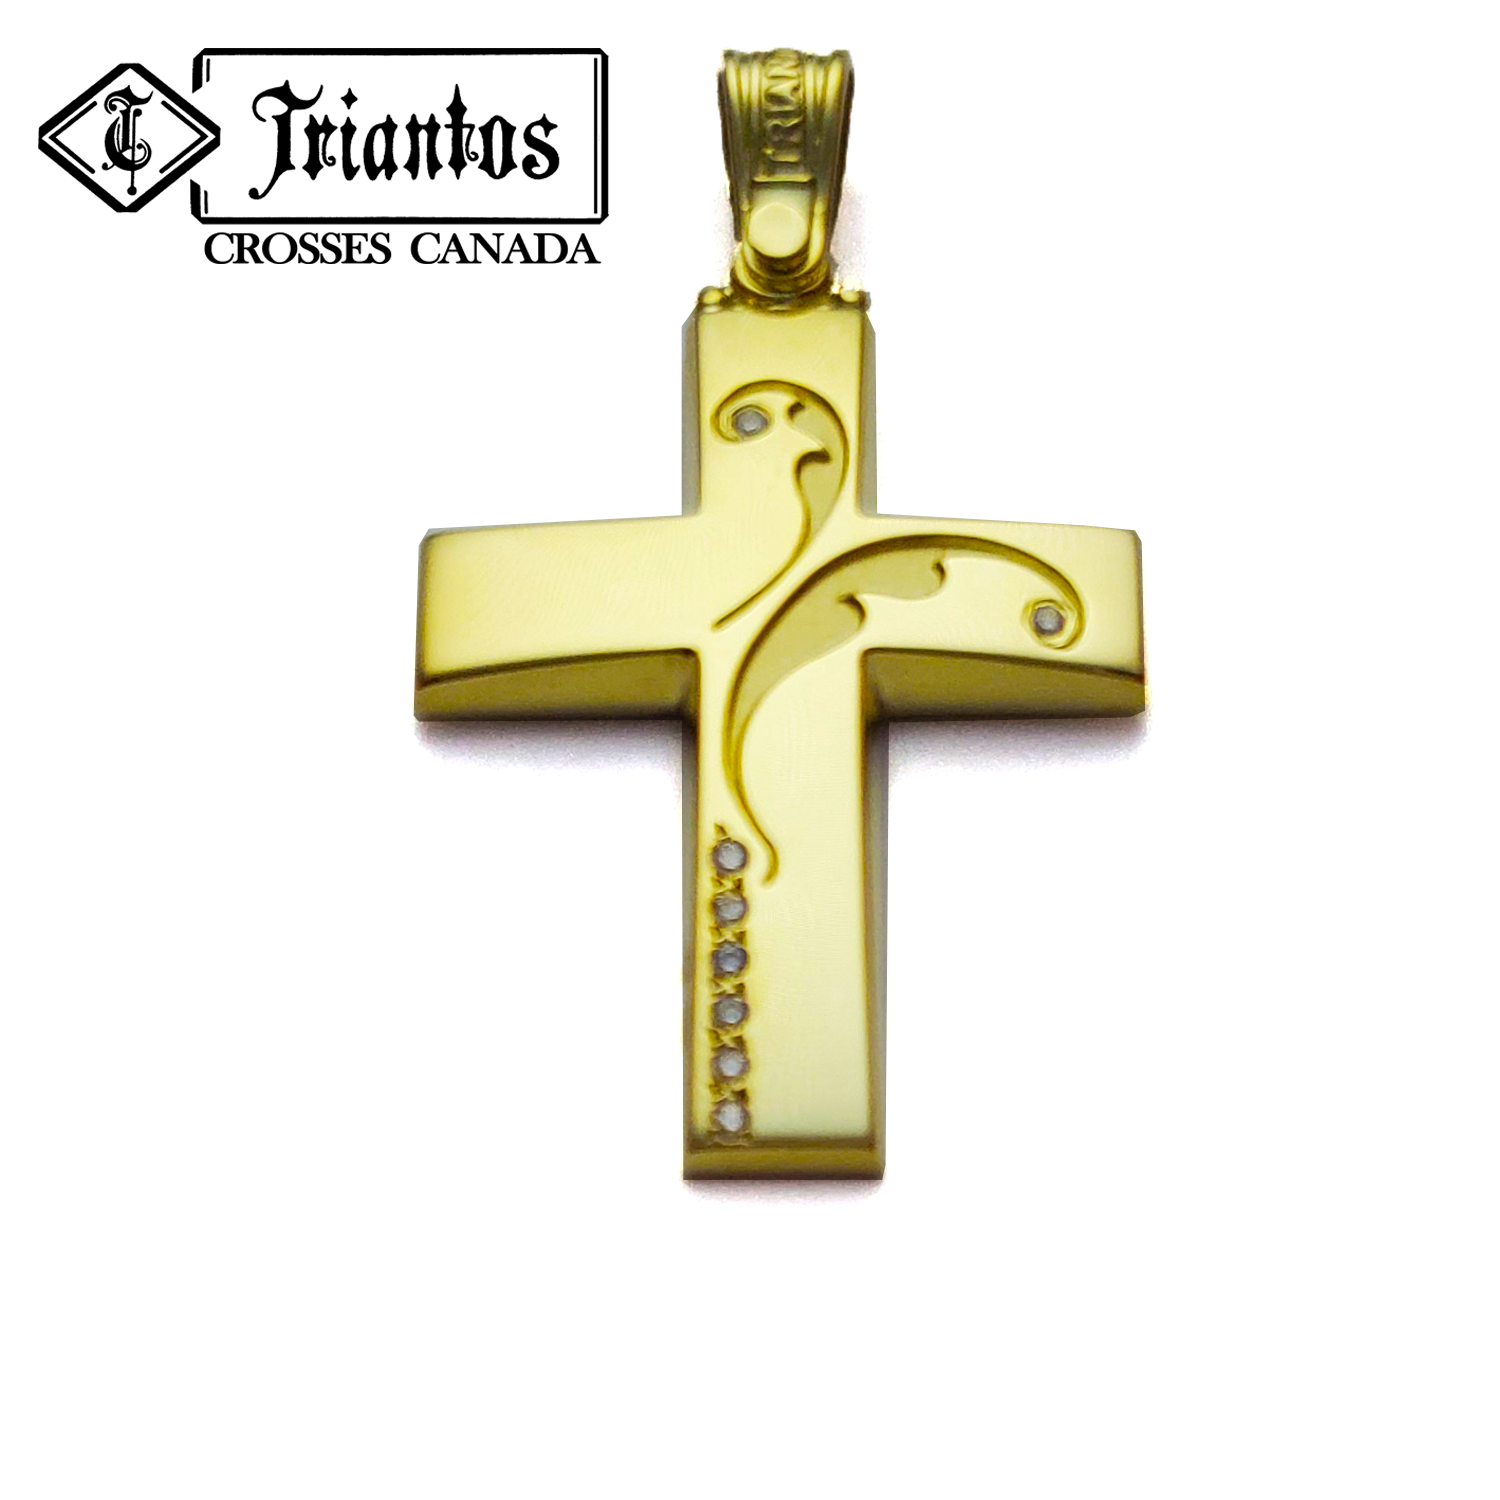 Cuasomized Cross Necklace with personalized won't rust - Unique Art World -  Handcraft and Engraving service